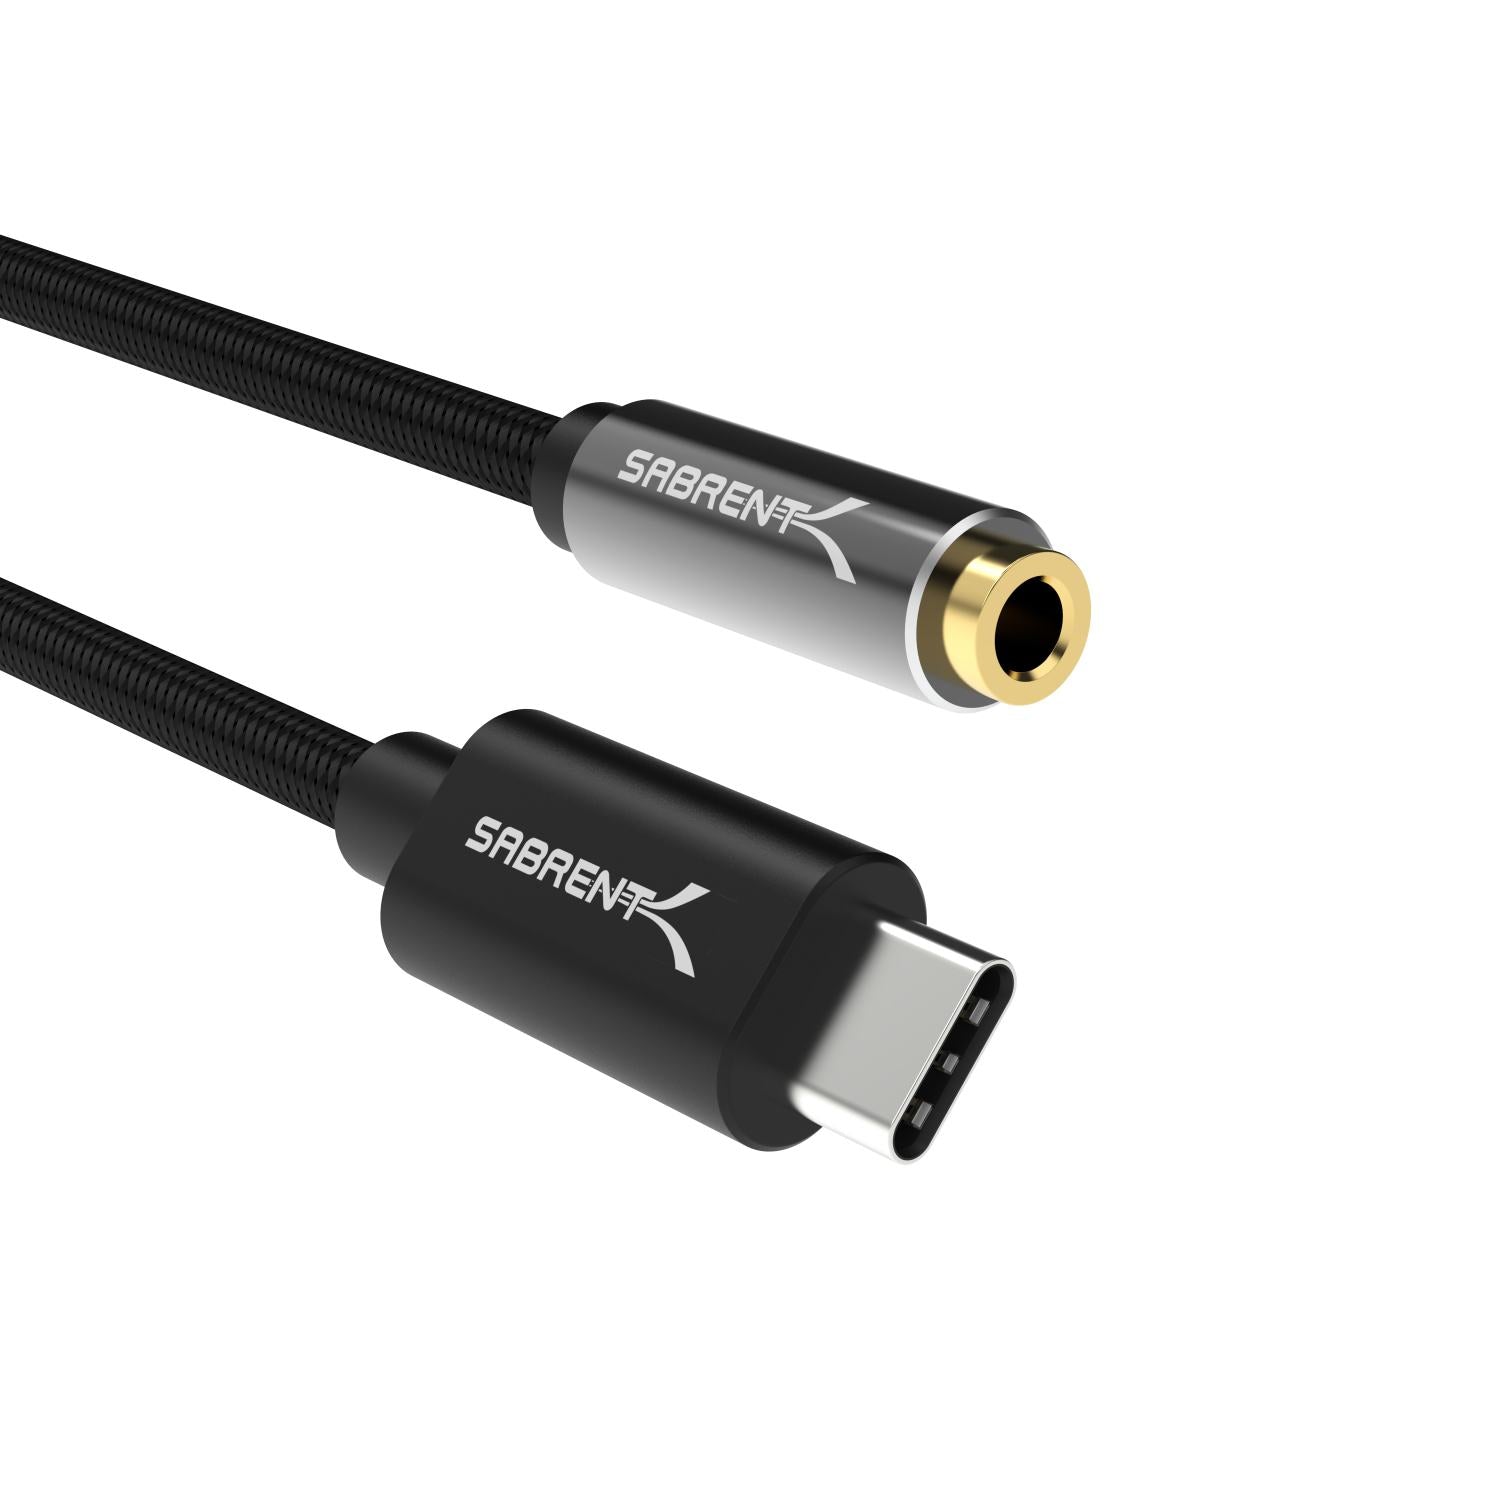 How to choose 3.5mm audio cables and adapters